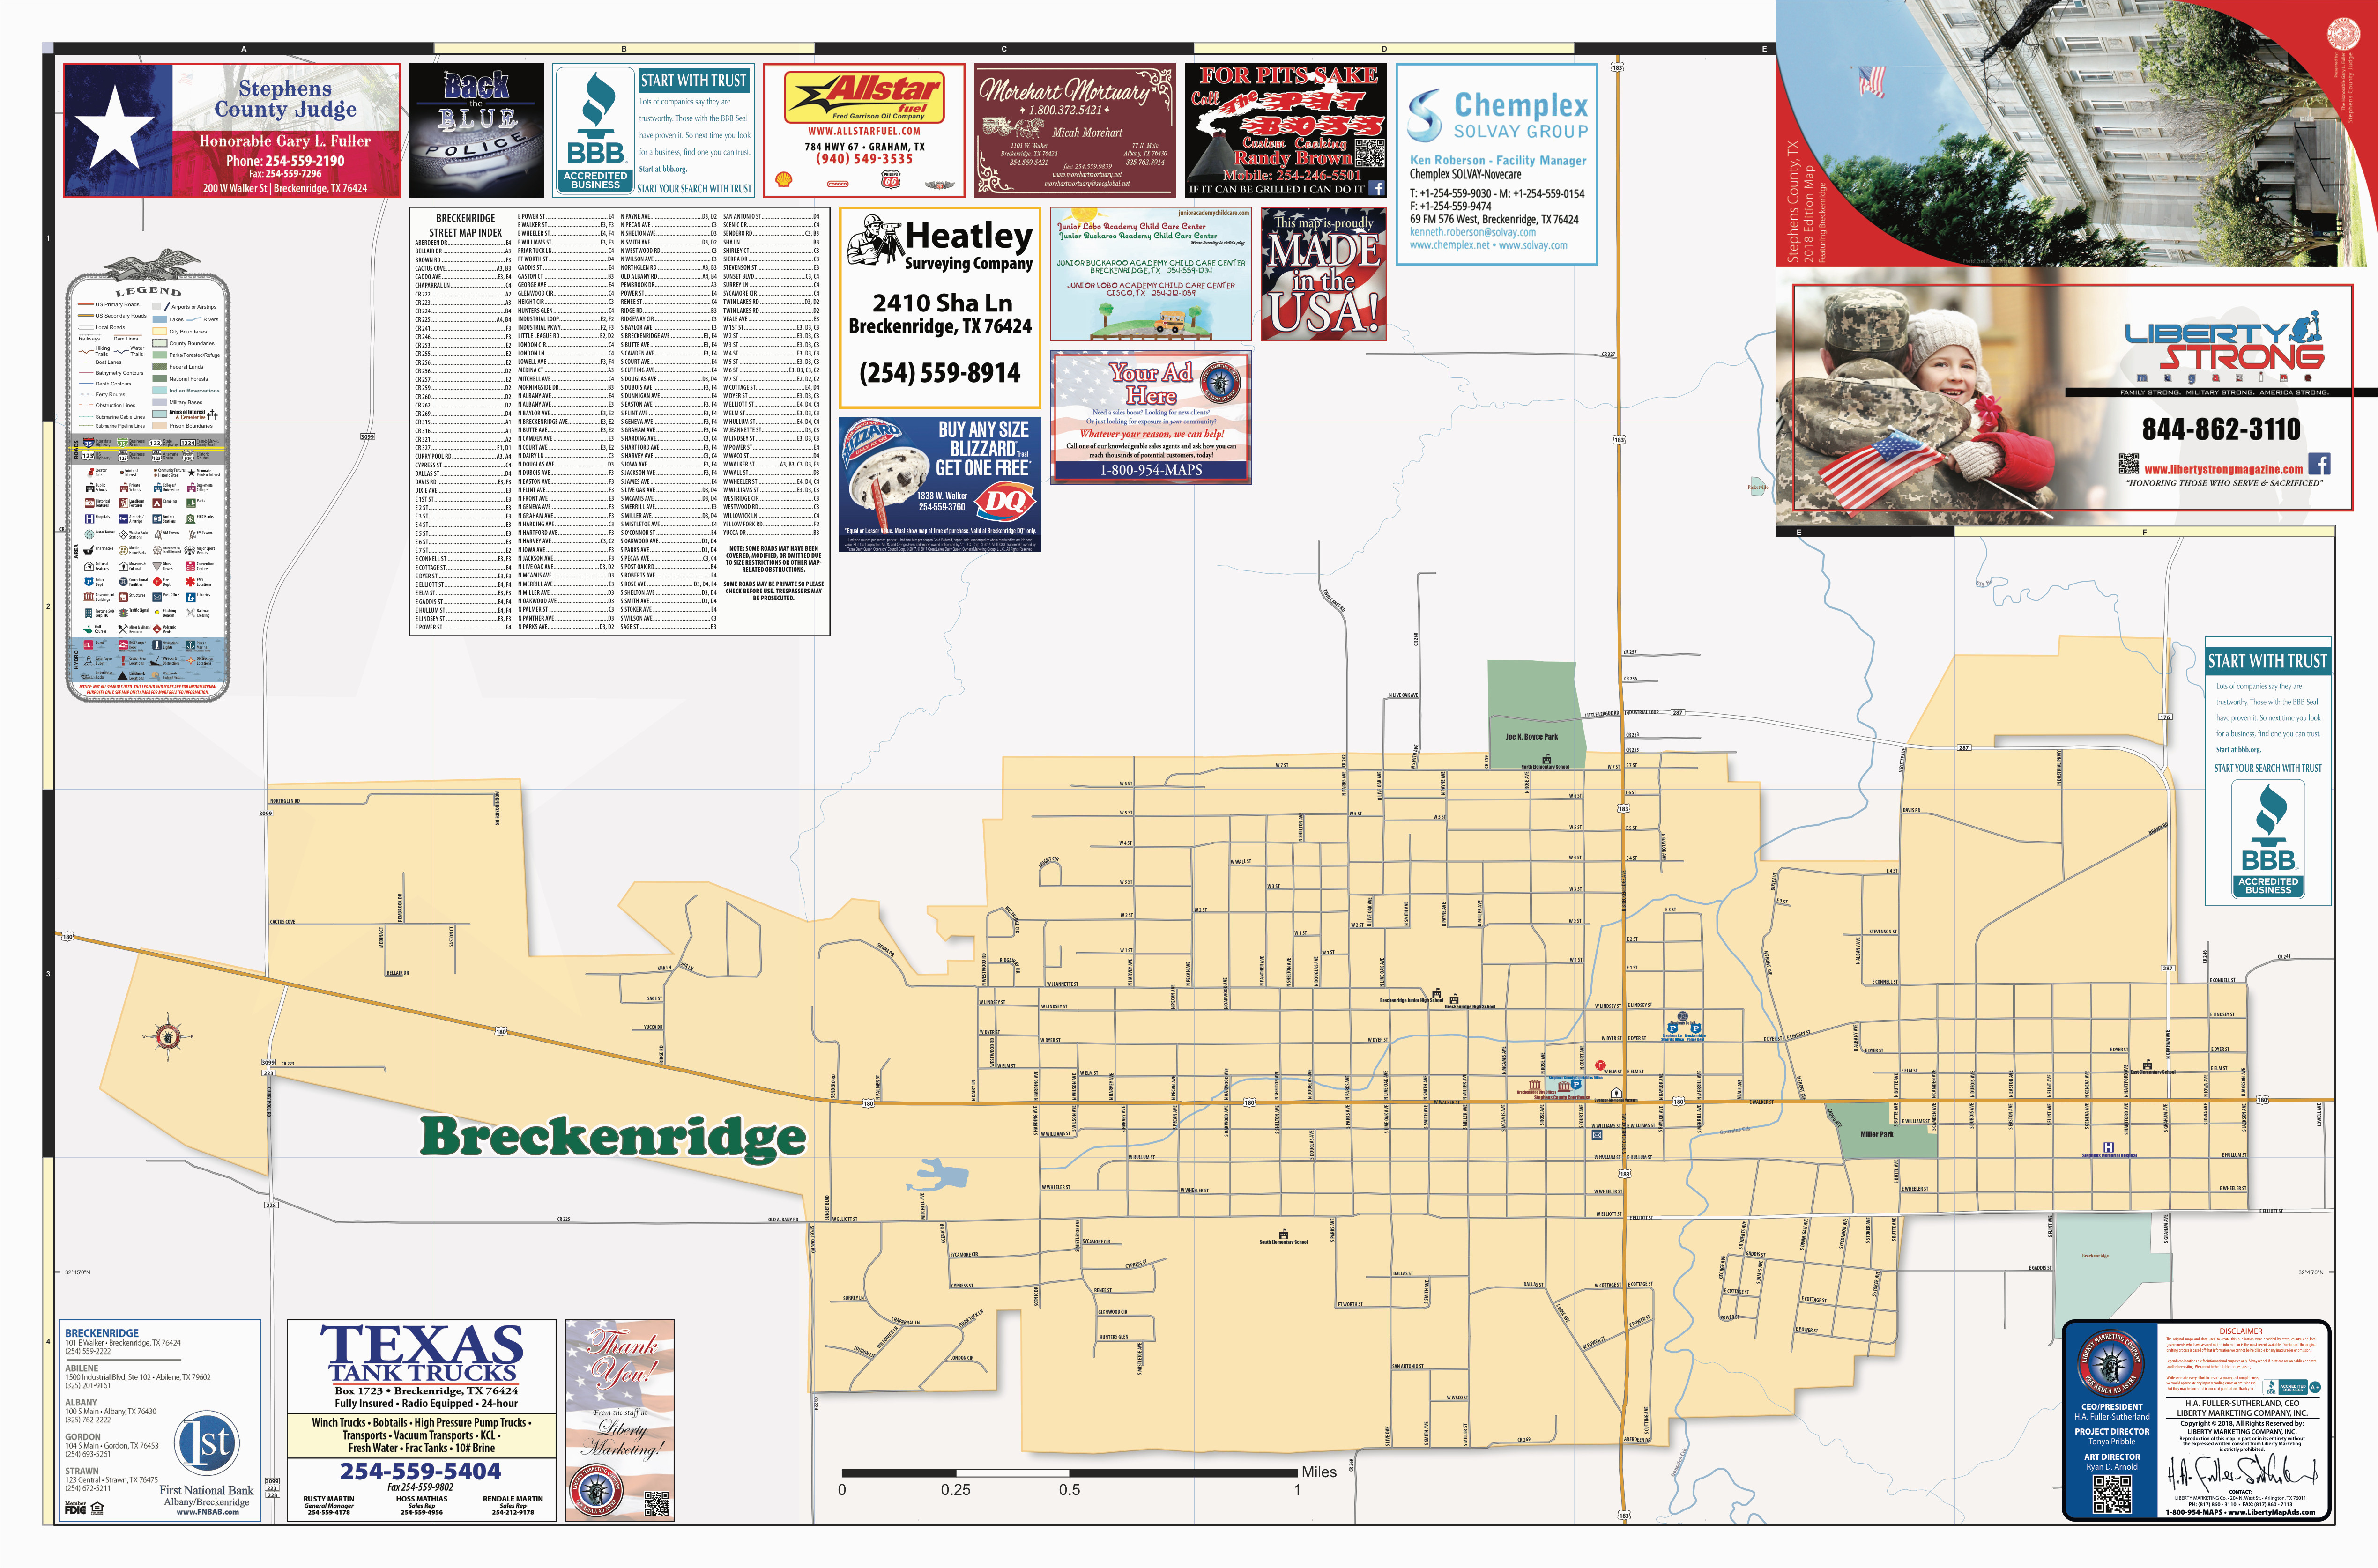 2018 edition map of stephens county tx pages 1 2 text version